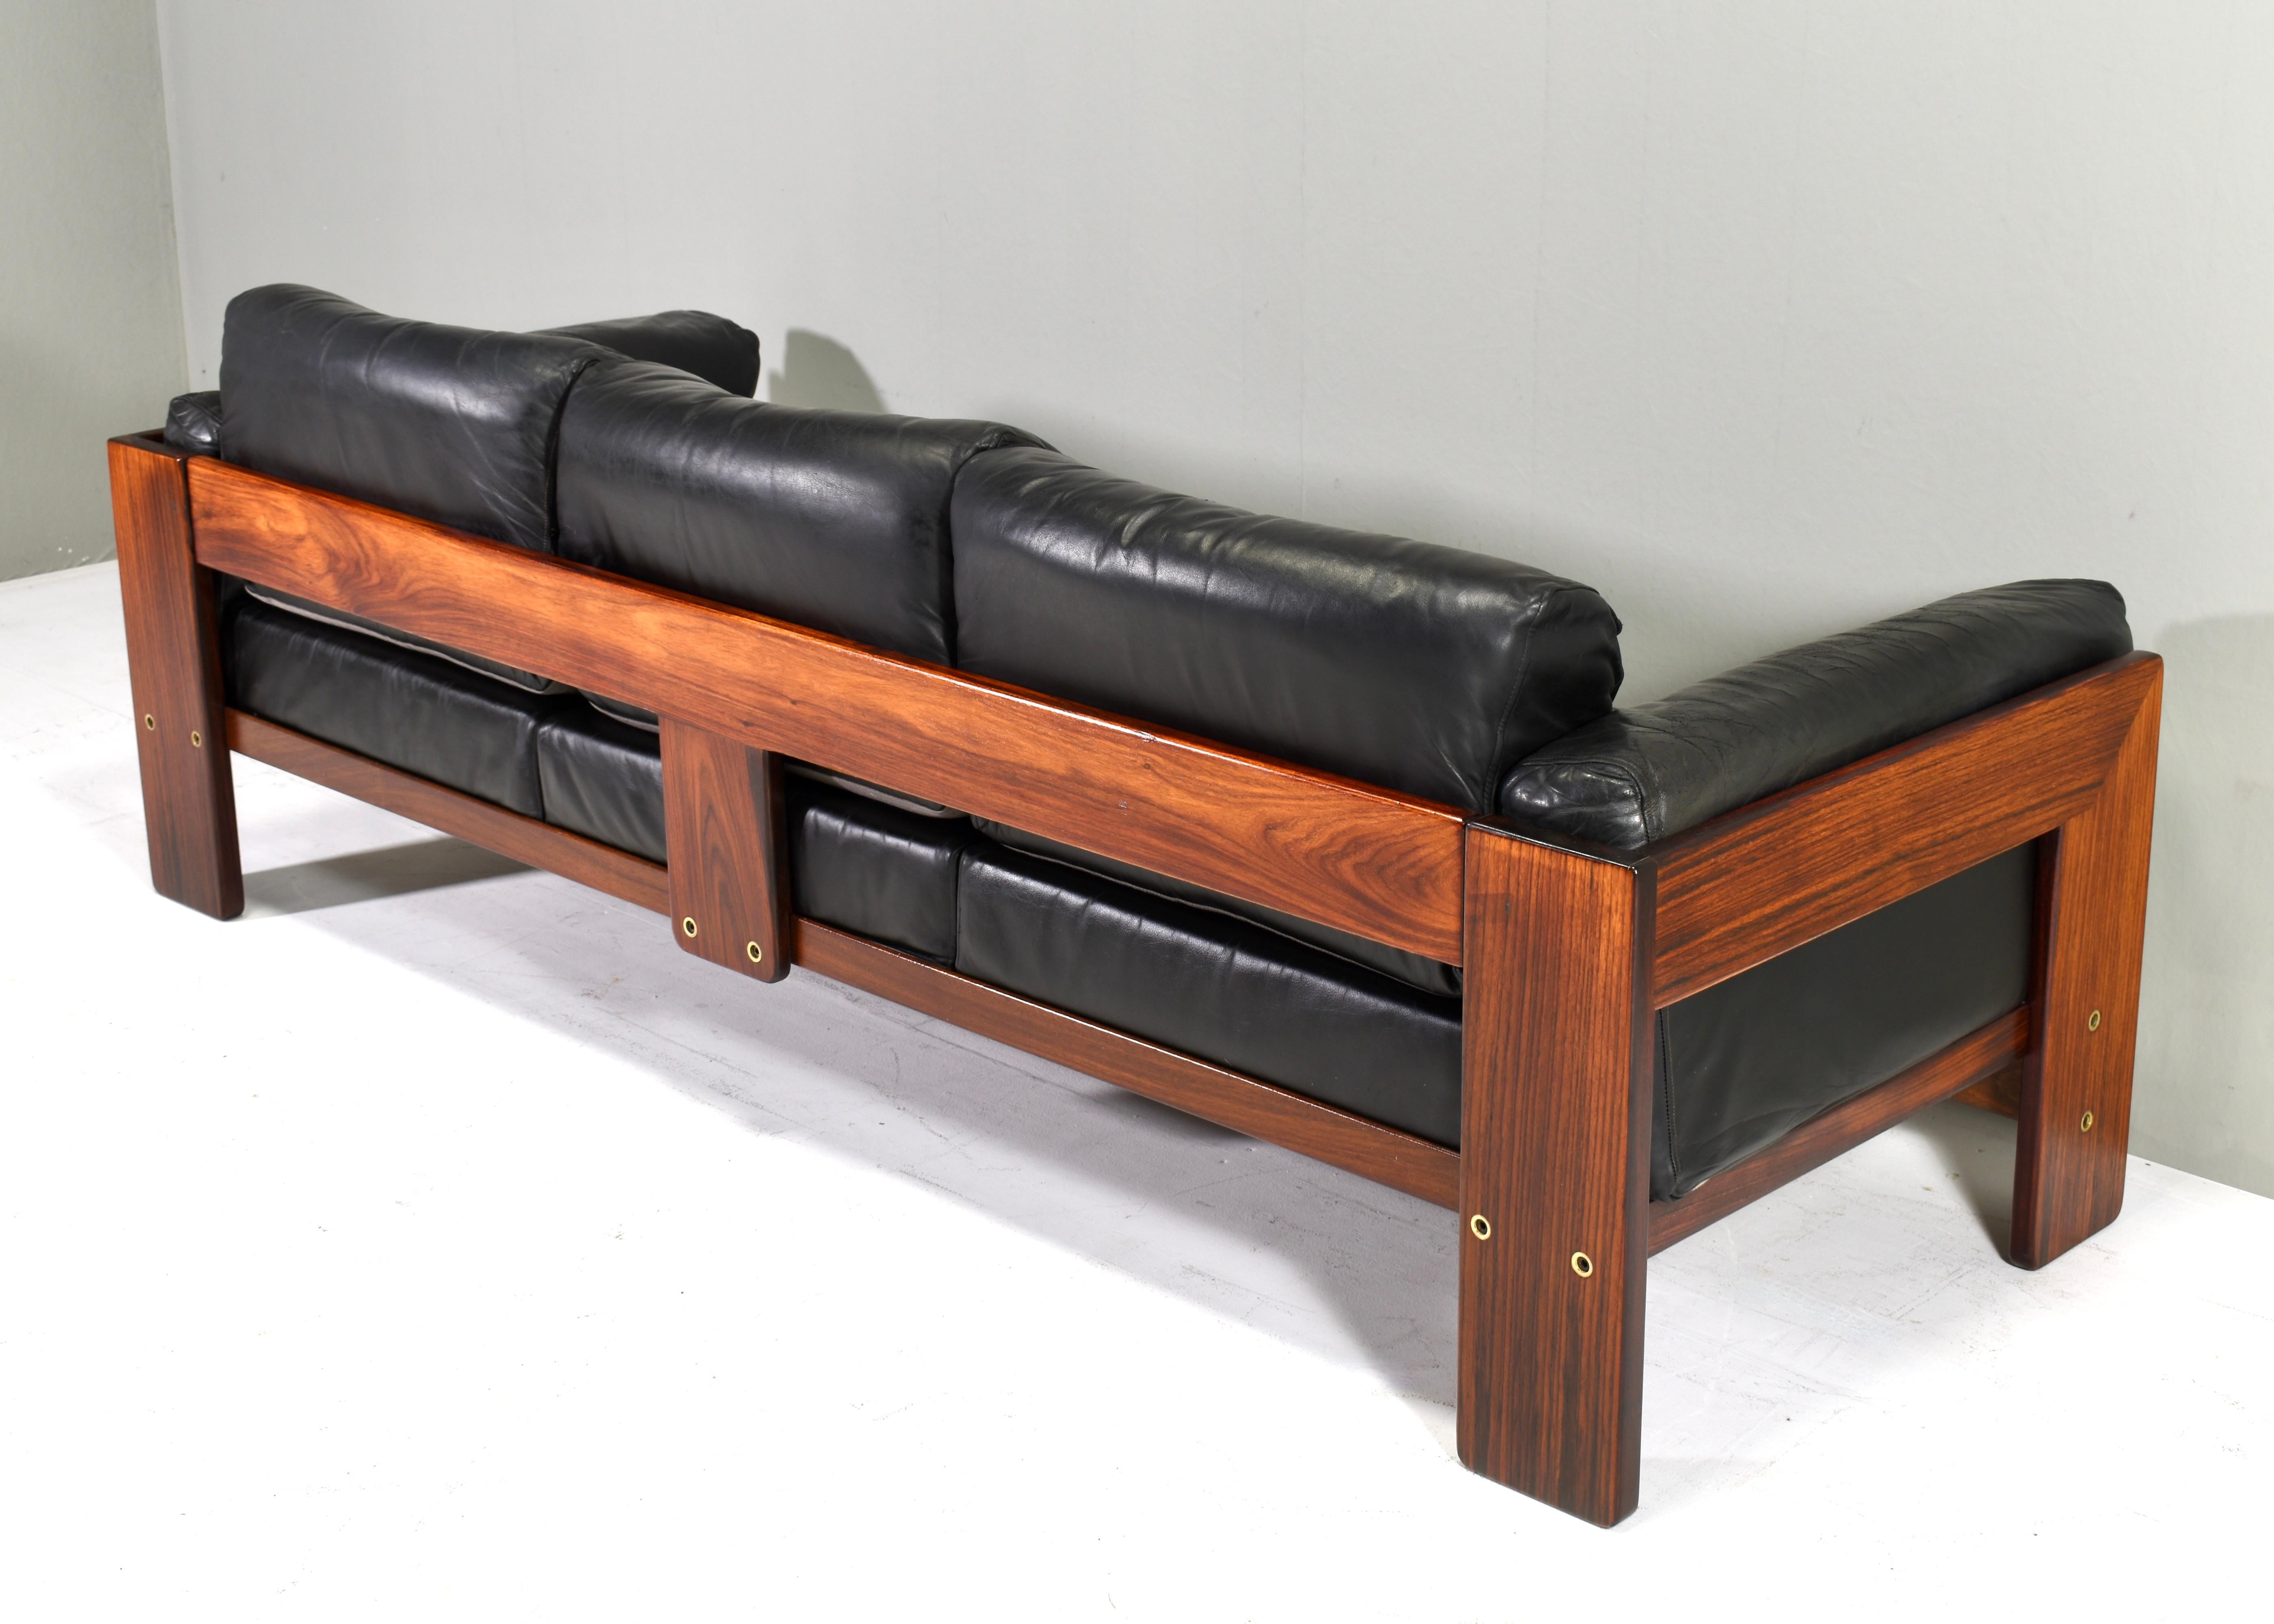 Mid-20th Century BASTIANO Sofa in black leather by Afra and Tobia Scarpa for KNOLL – Italy, 1962 For Sale